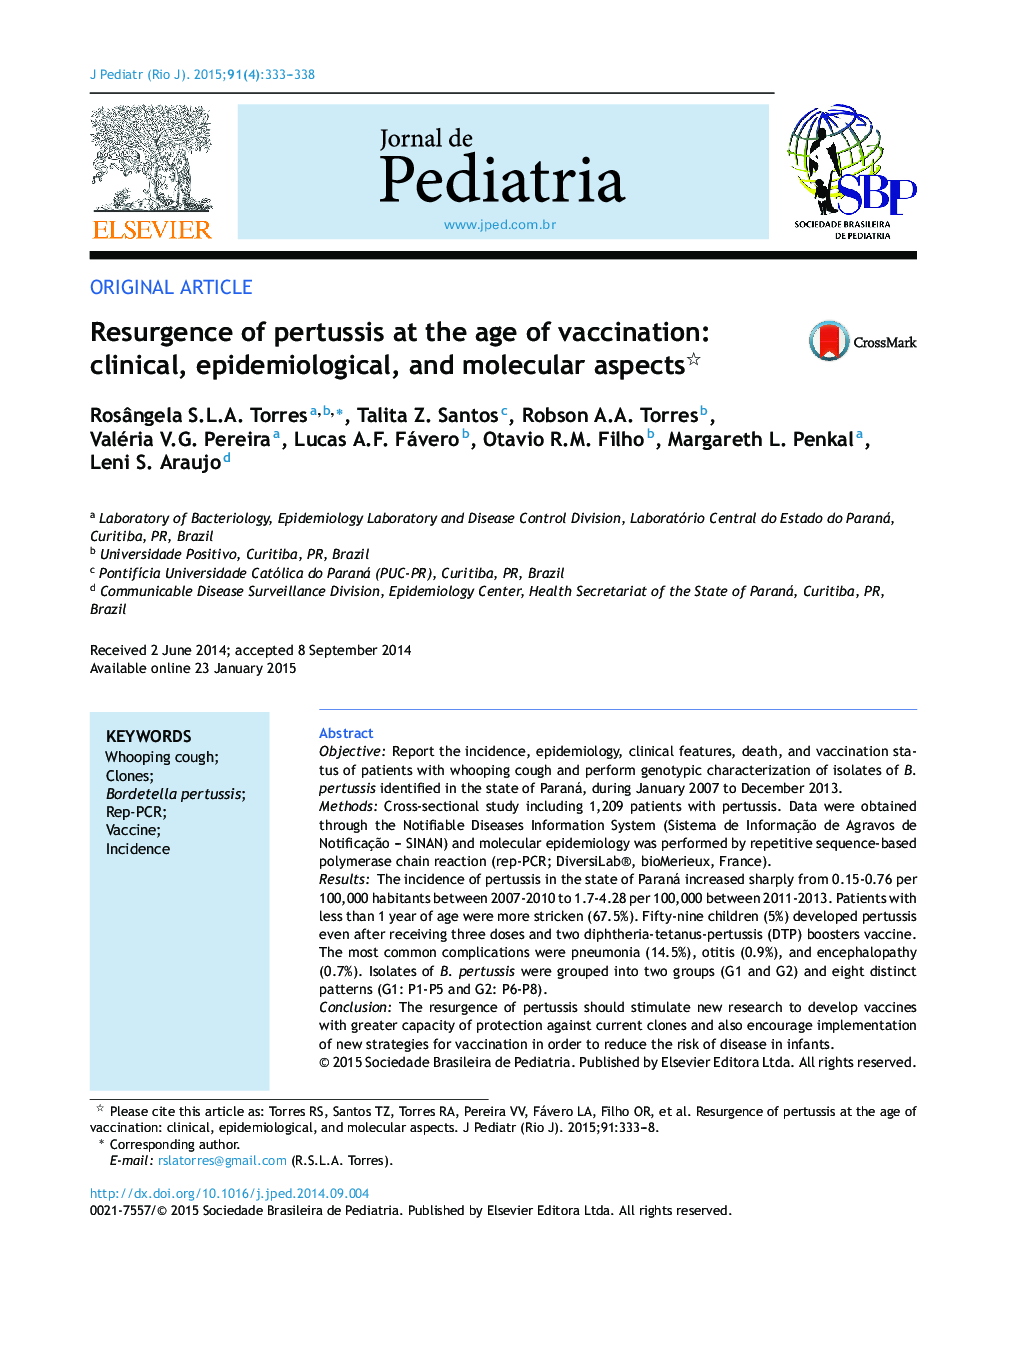 Resurgence of pertussis at the age of vaccination: clinical, epidemiological, and molecular aspects 